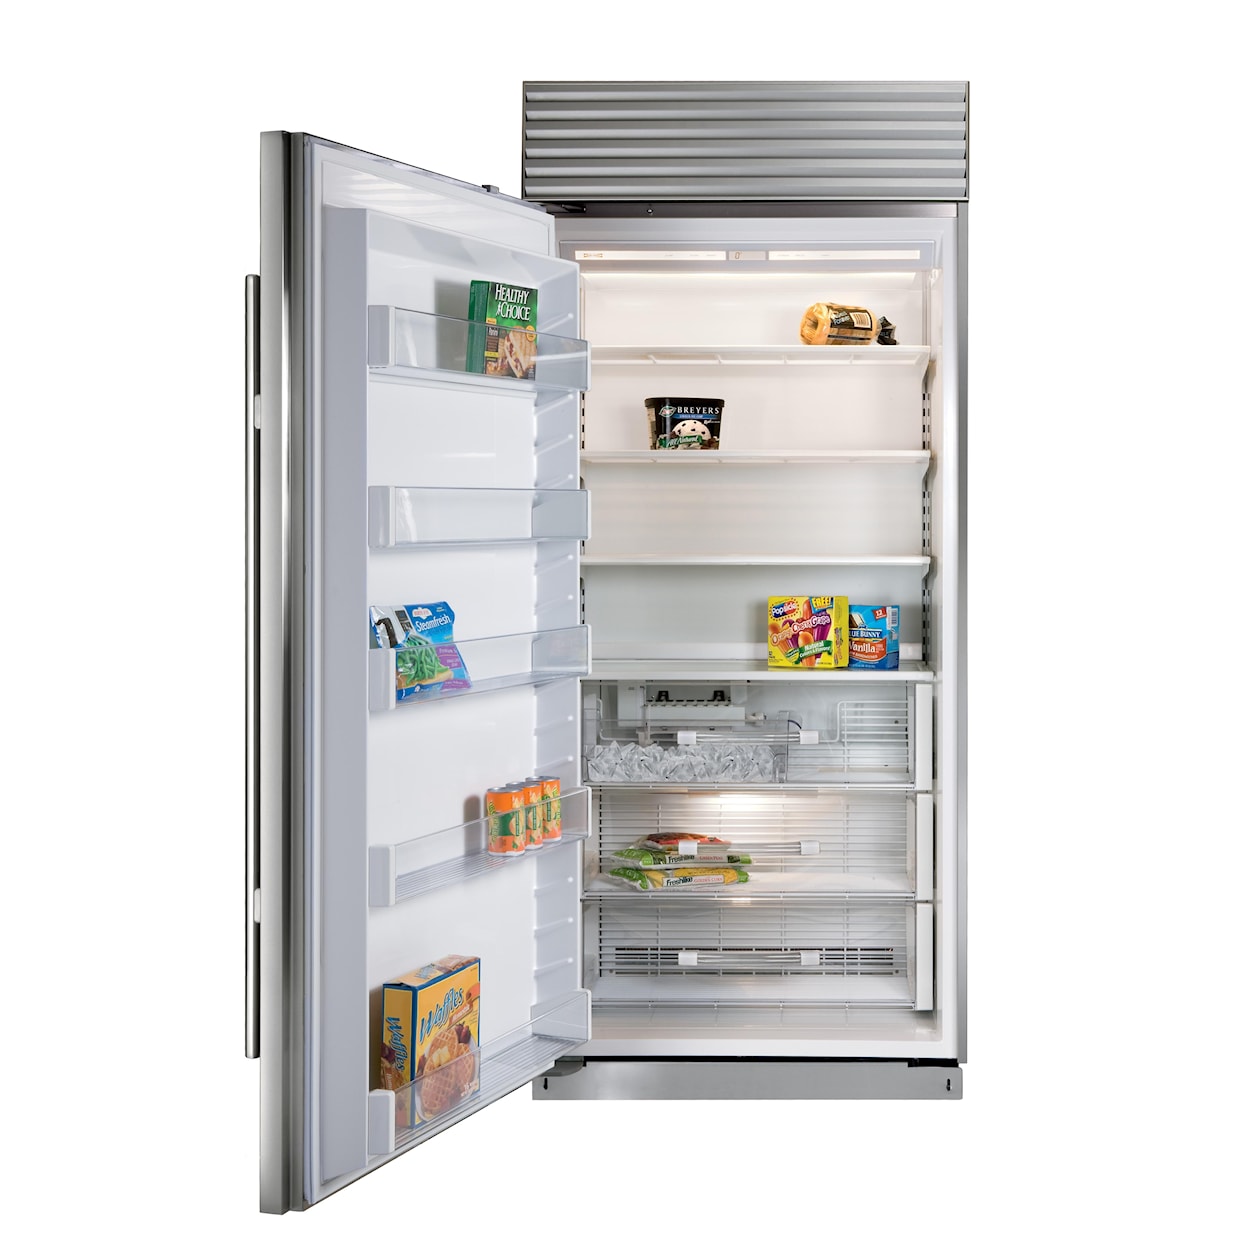 Sub-Zero Built-In Refrigeration 30" Built-In Over-and-Under Refrigerator